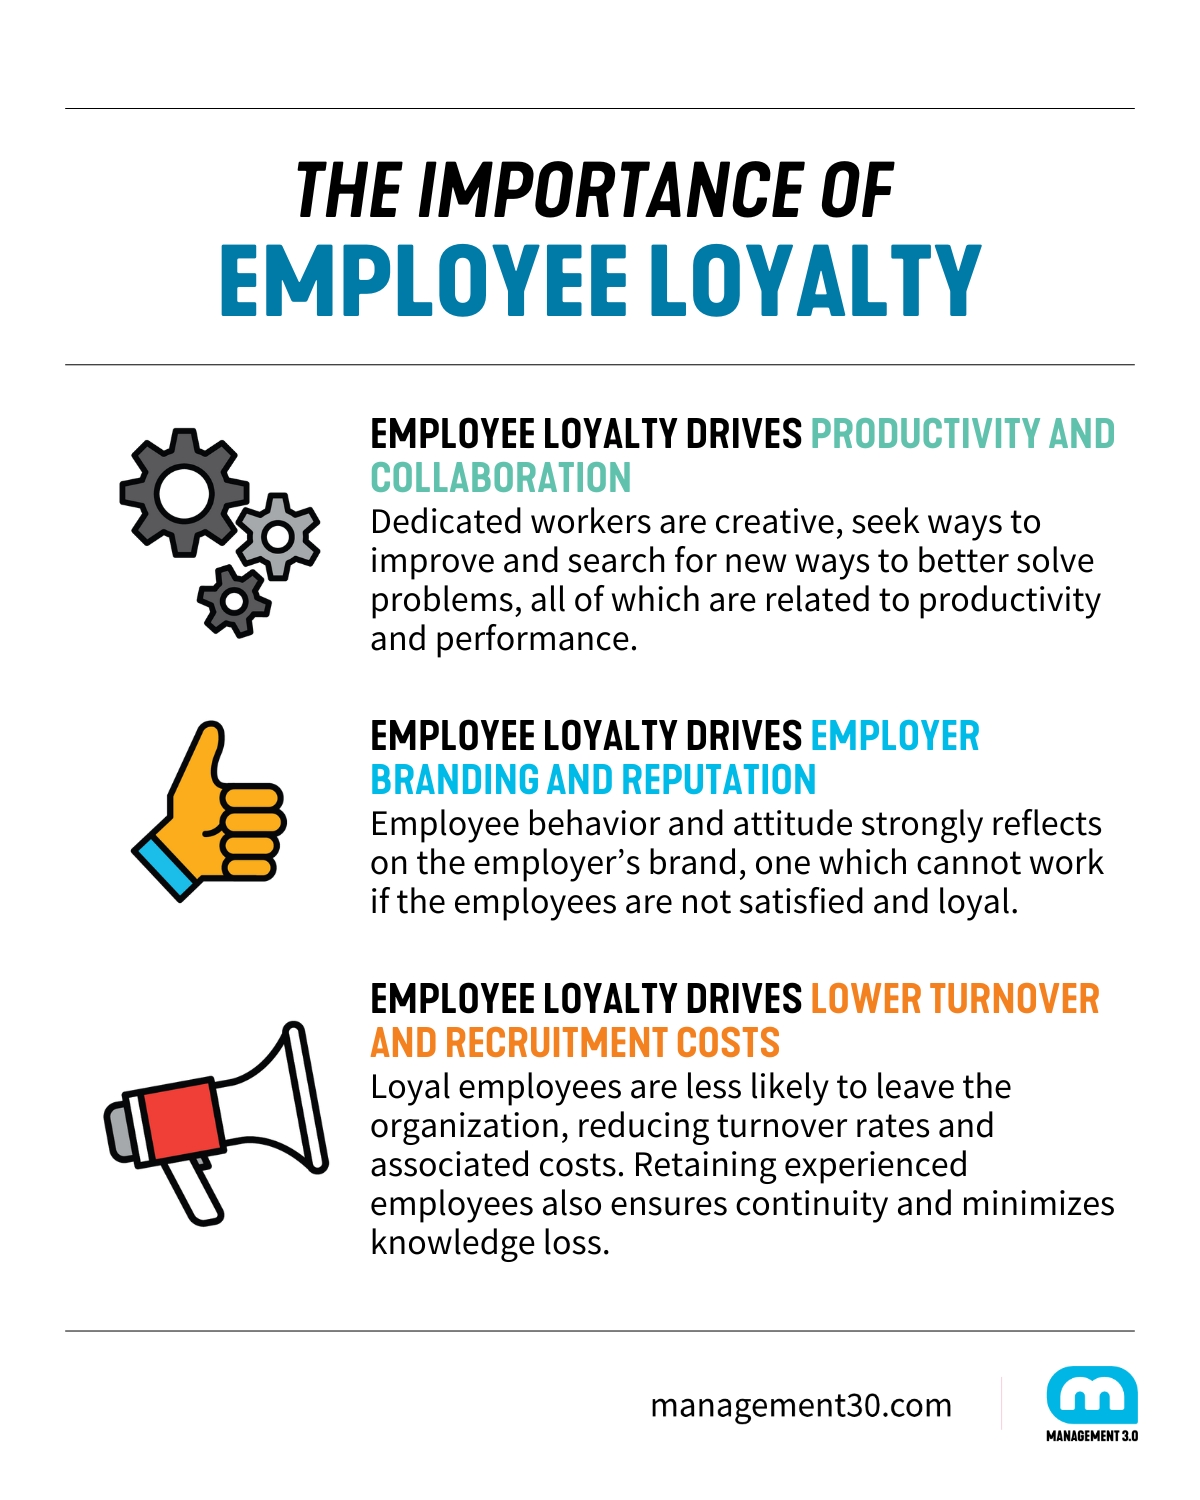 The Importance of Employee Loyalty